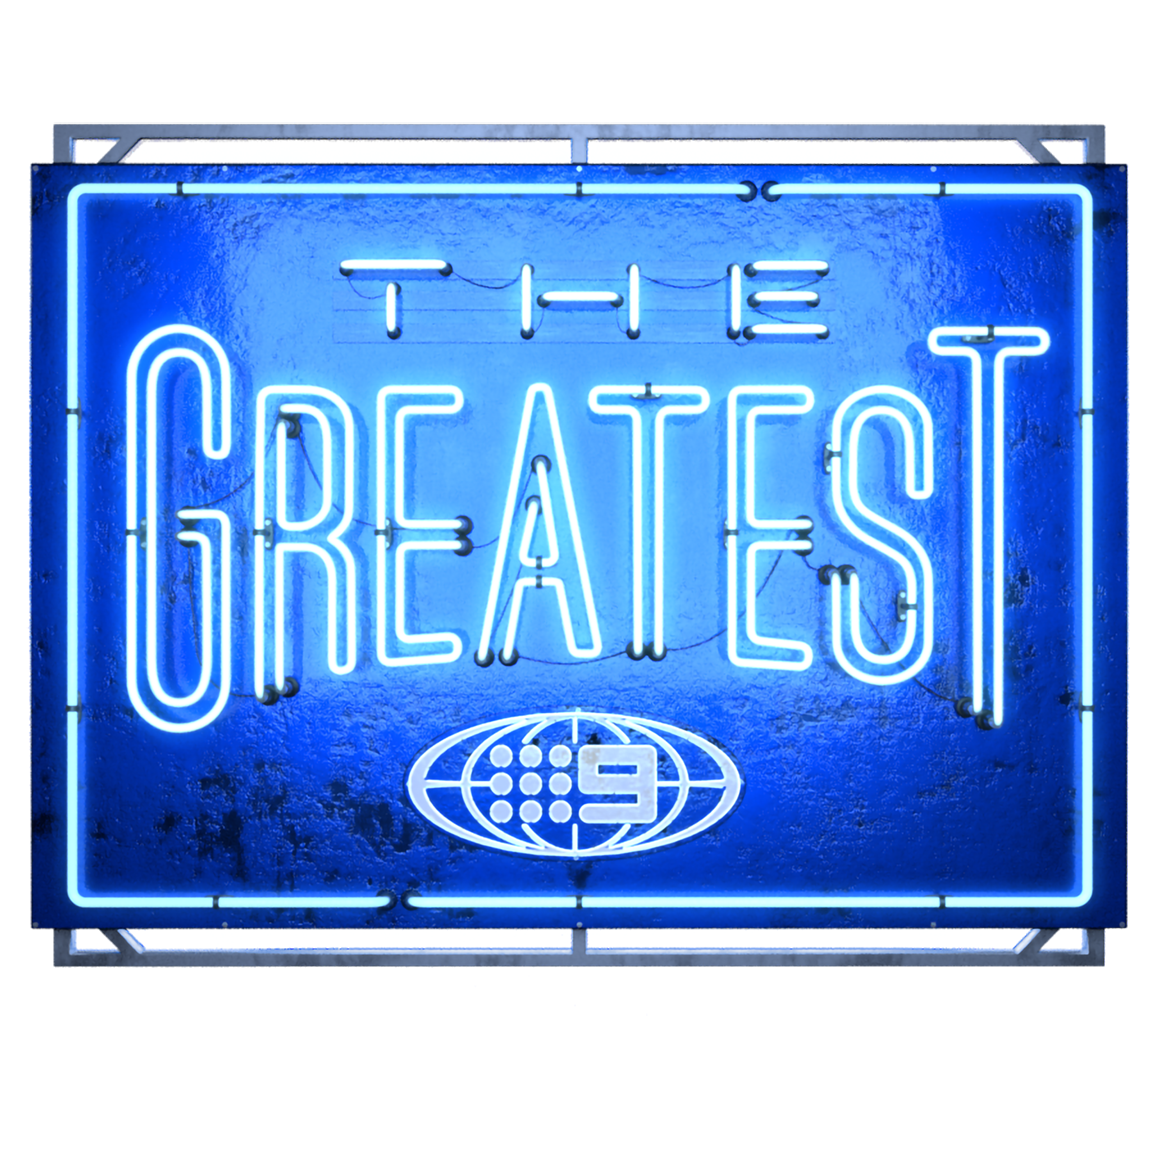   The Greatest  Source: Nine Network 